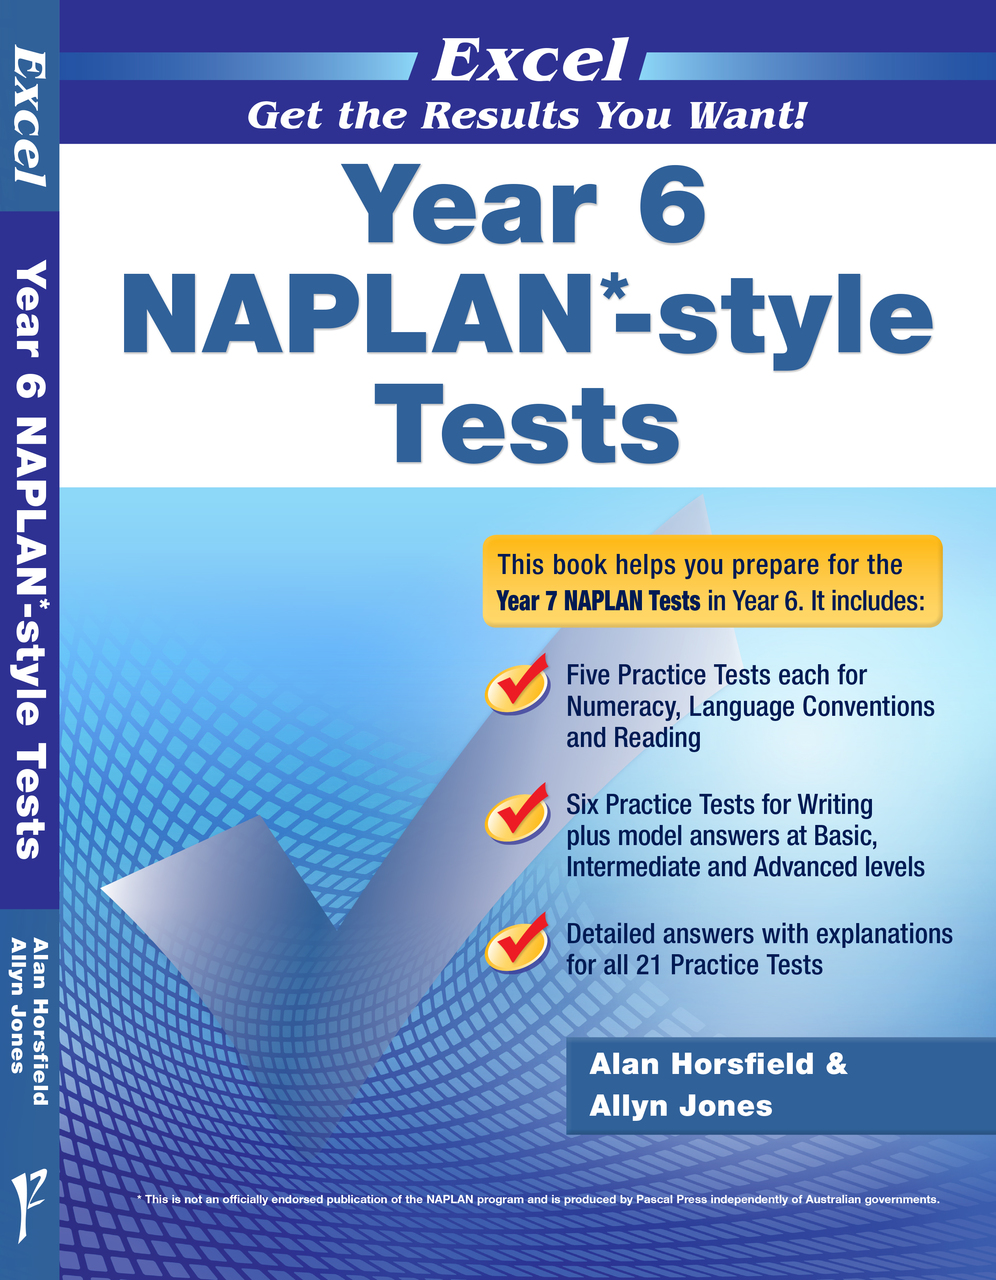 EXCEL - YEAR 6 NAPLAN*-STYLE TESTS